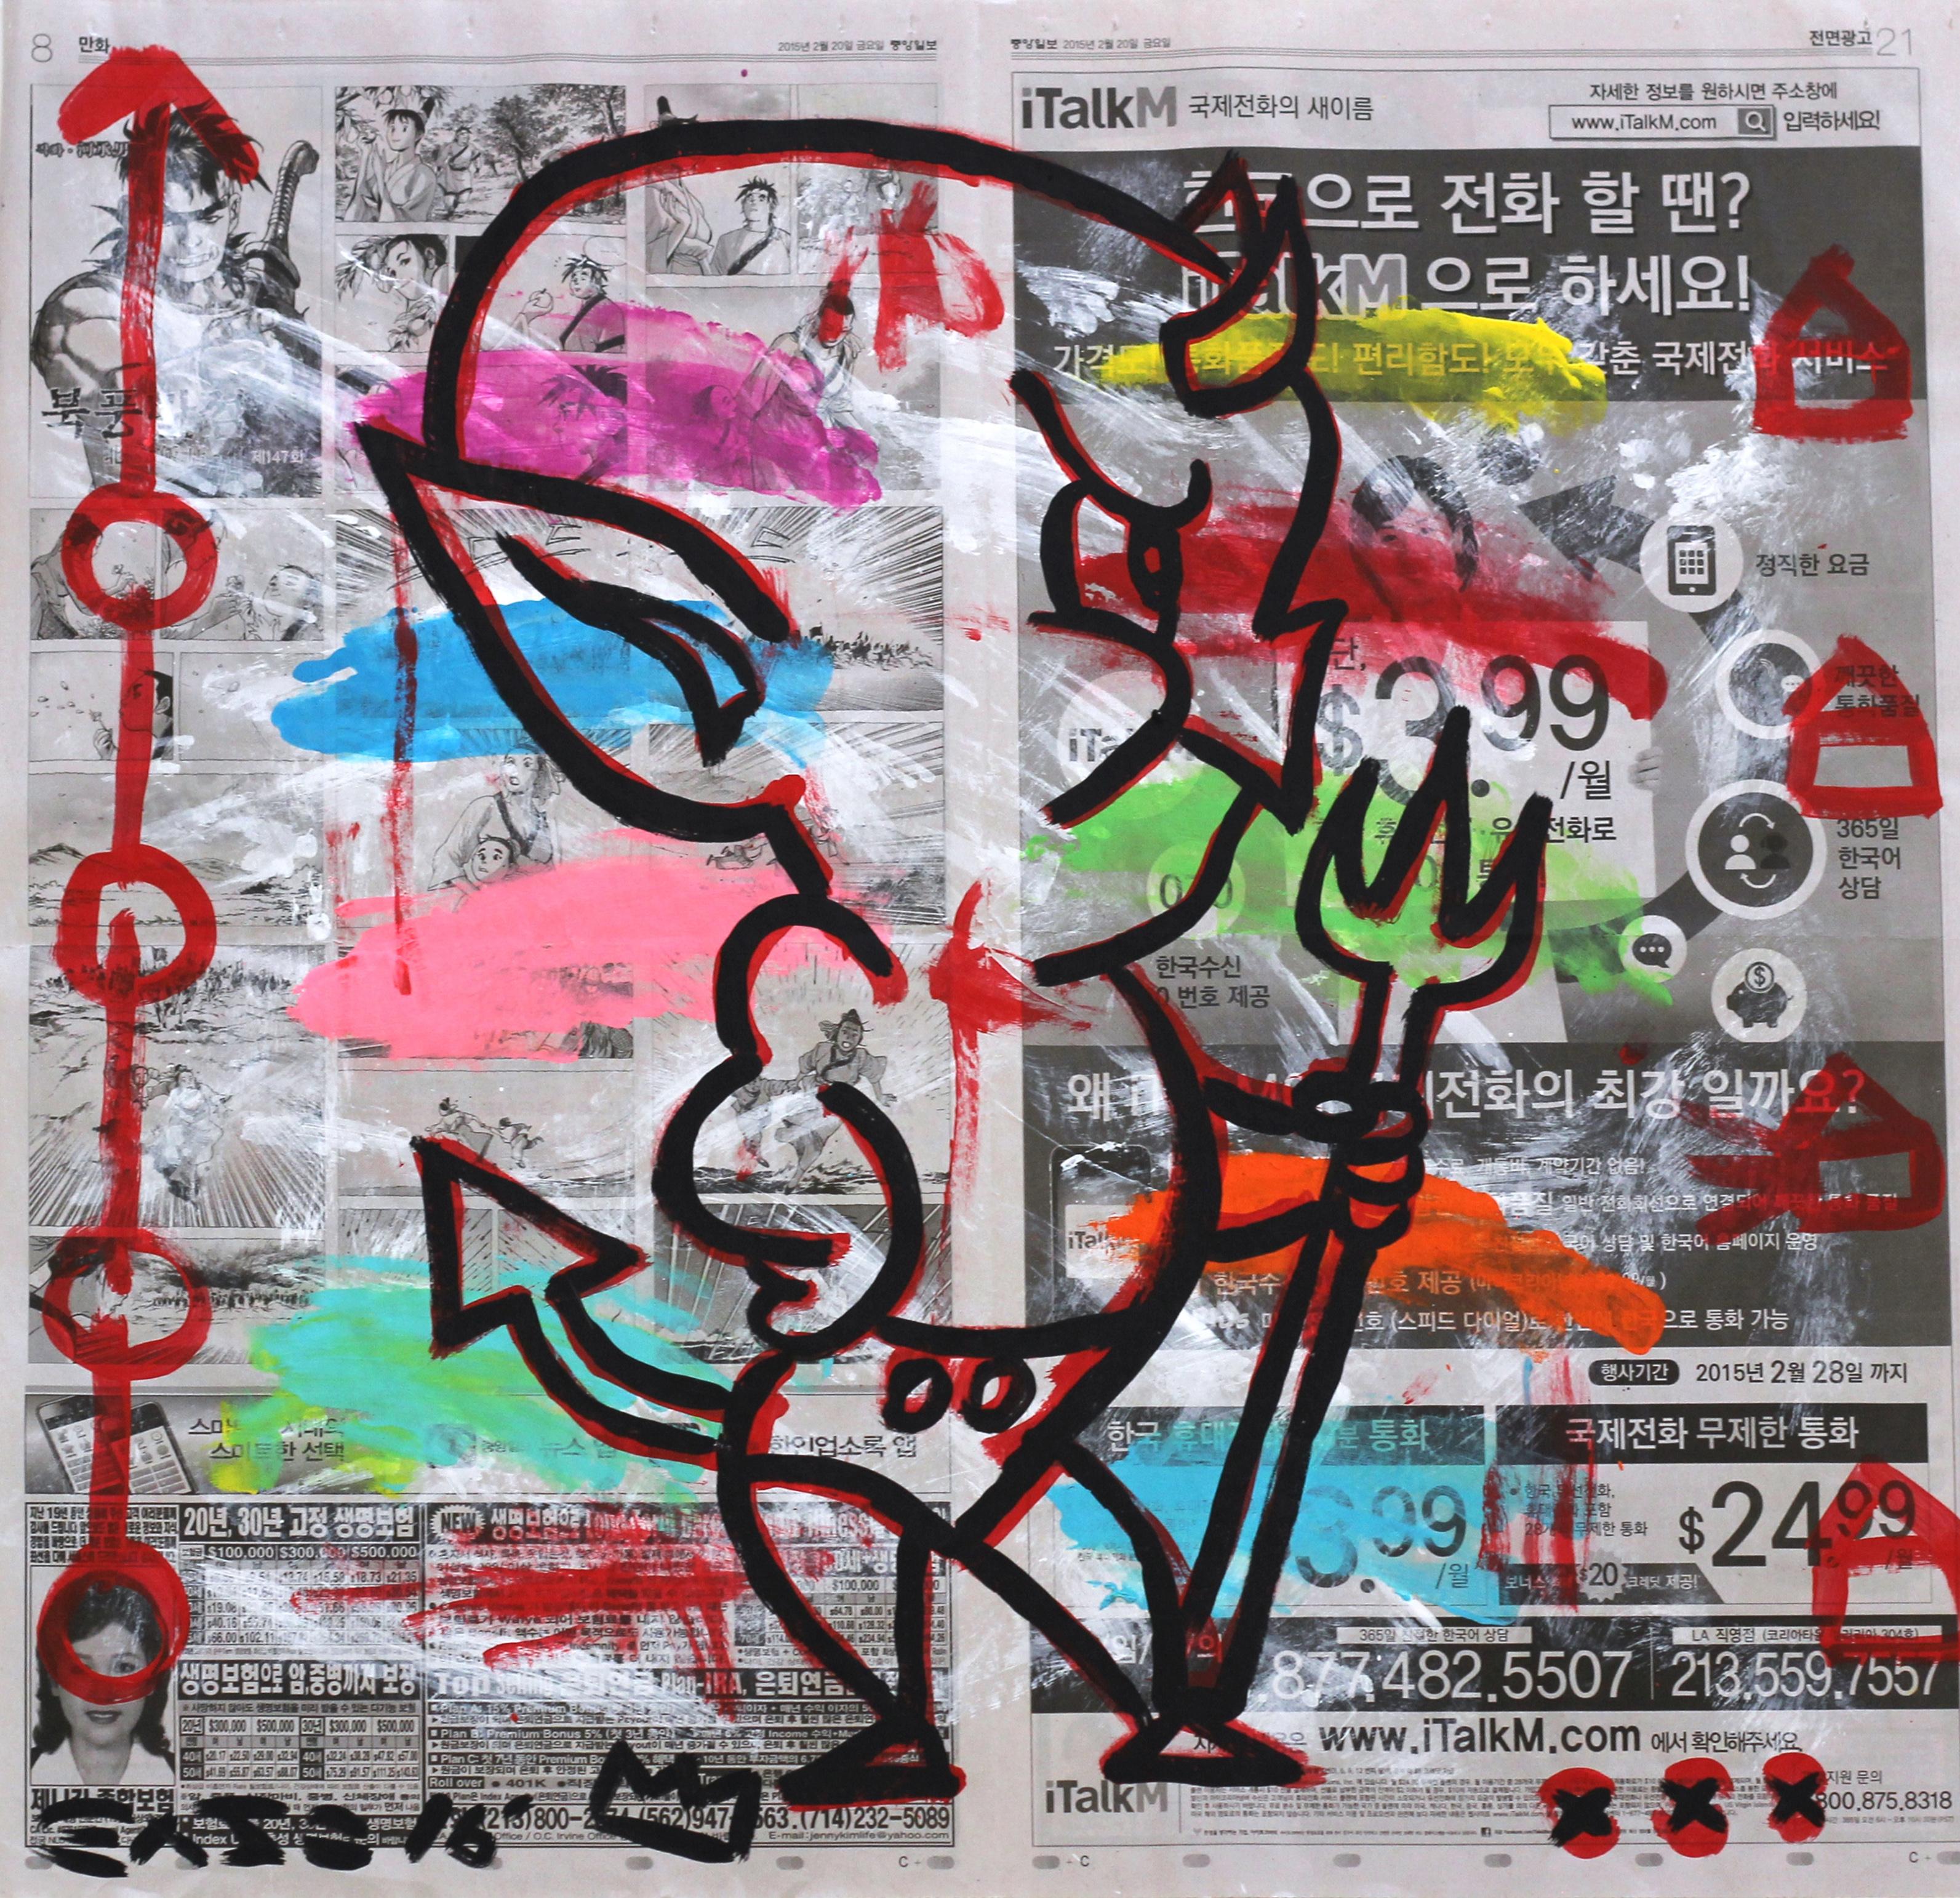 Los Angeles street artist Gary John exploded onto the international art scene during the Art Basel Miami art fair in 2013. John’s playfully bold work quickly gained attention and he was named one of 20 standout artists at the 2014 NY Affordable Art